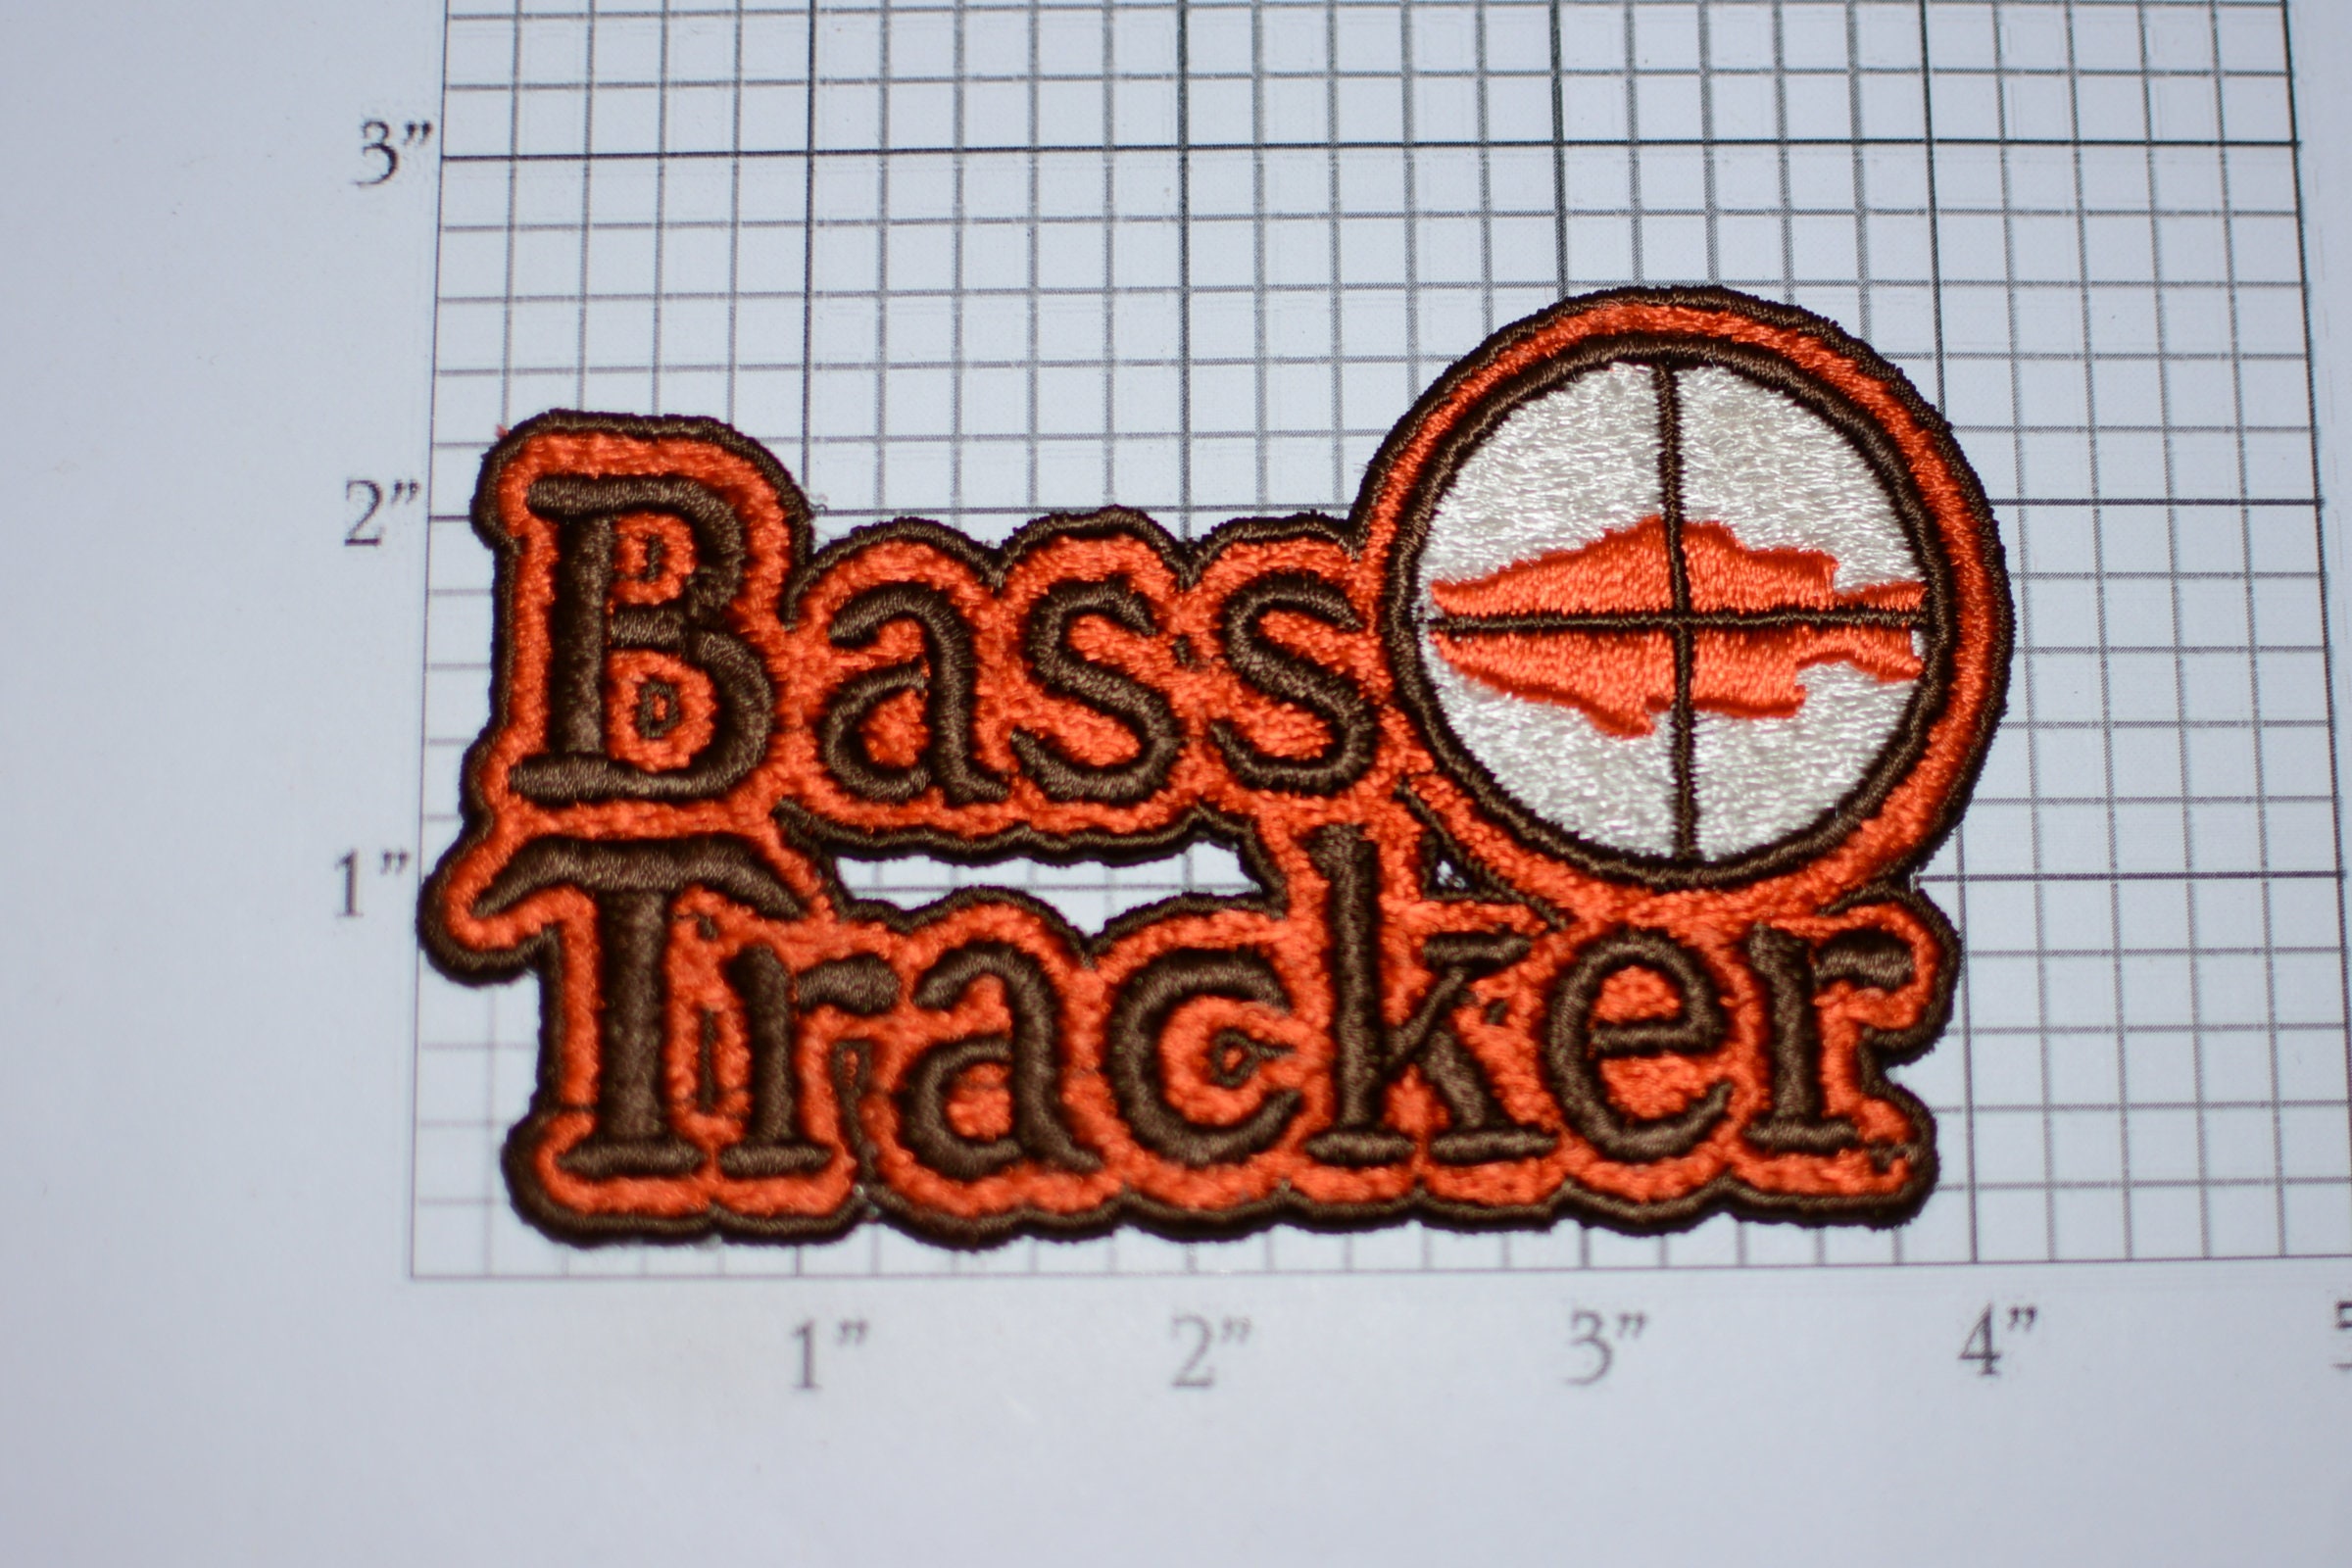 Bass Tracker Sew-on Vintage Embroidered Clothing Patch for Angler Fisherman  Jean Jacket Shirt Hat Coat Pro Fishing Collectible Keepsake Logo